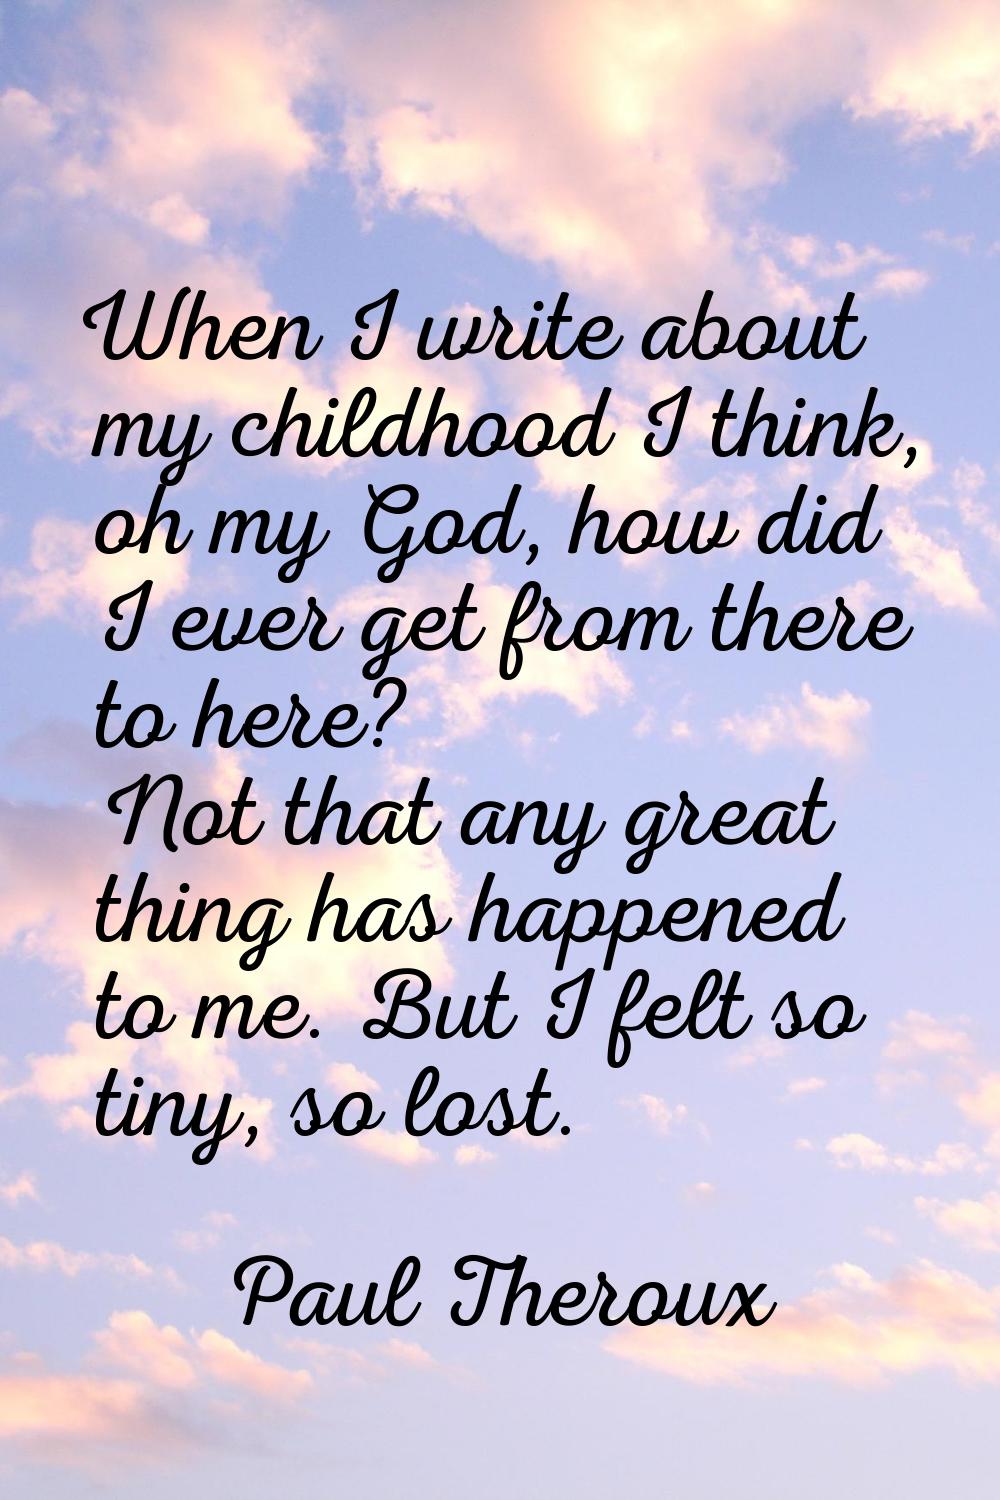 When I write about my childhood I think, oh my God, how did I ever get from there to here? Not that